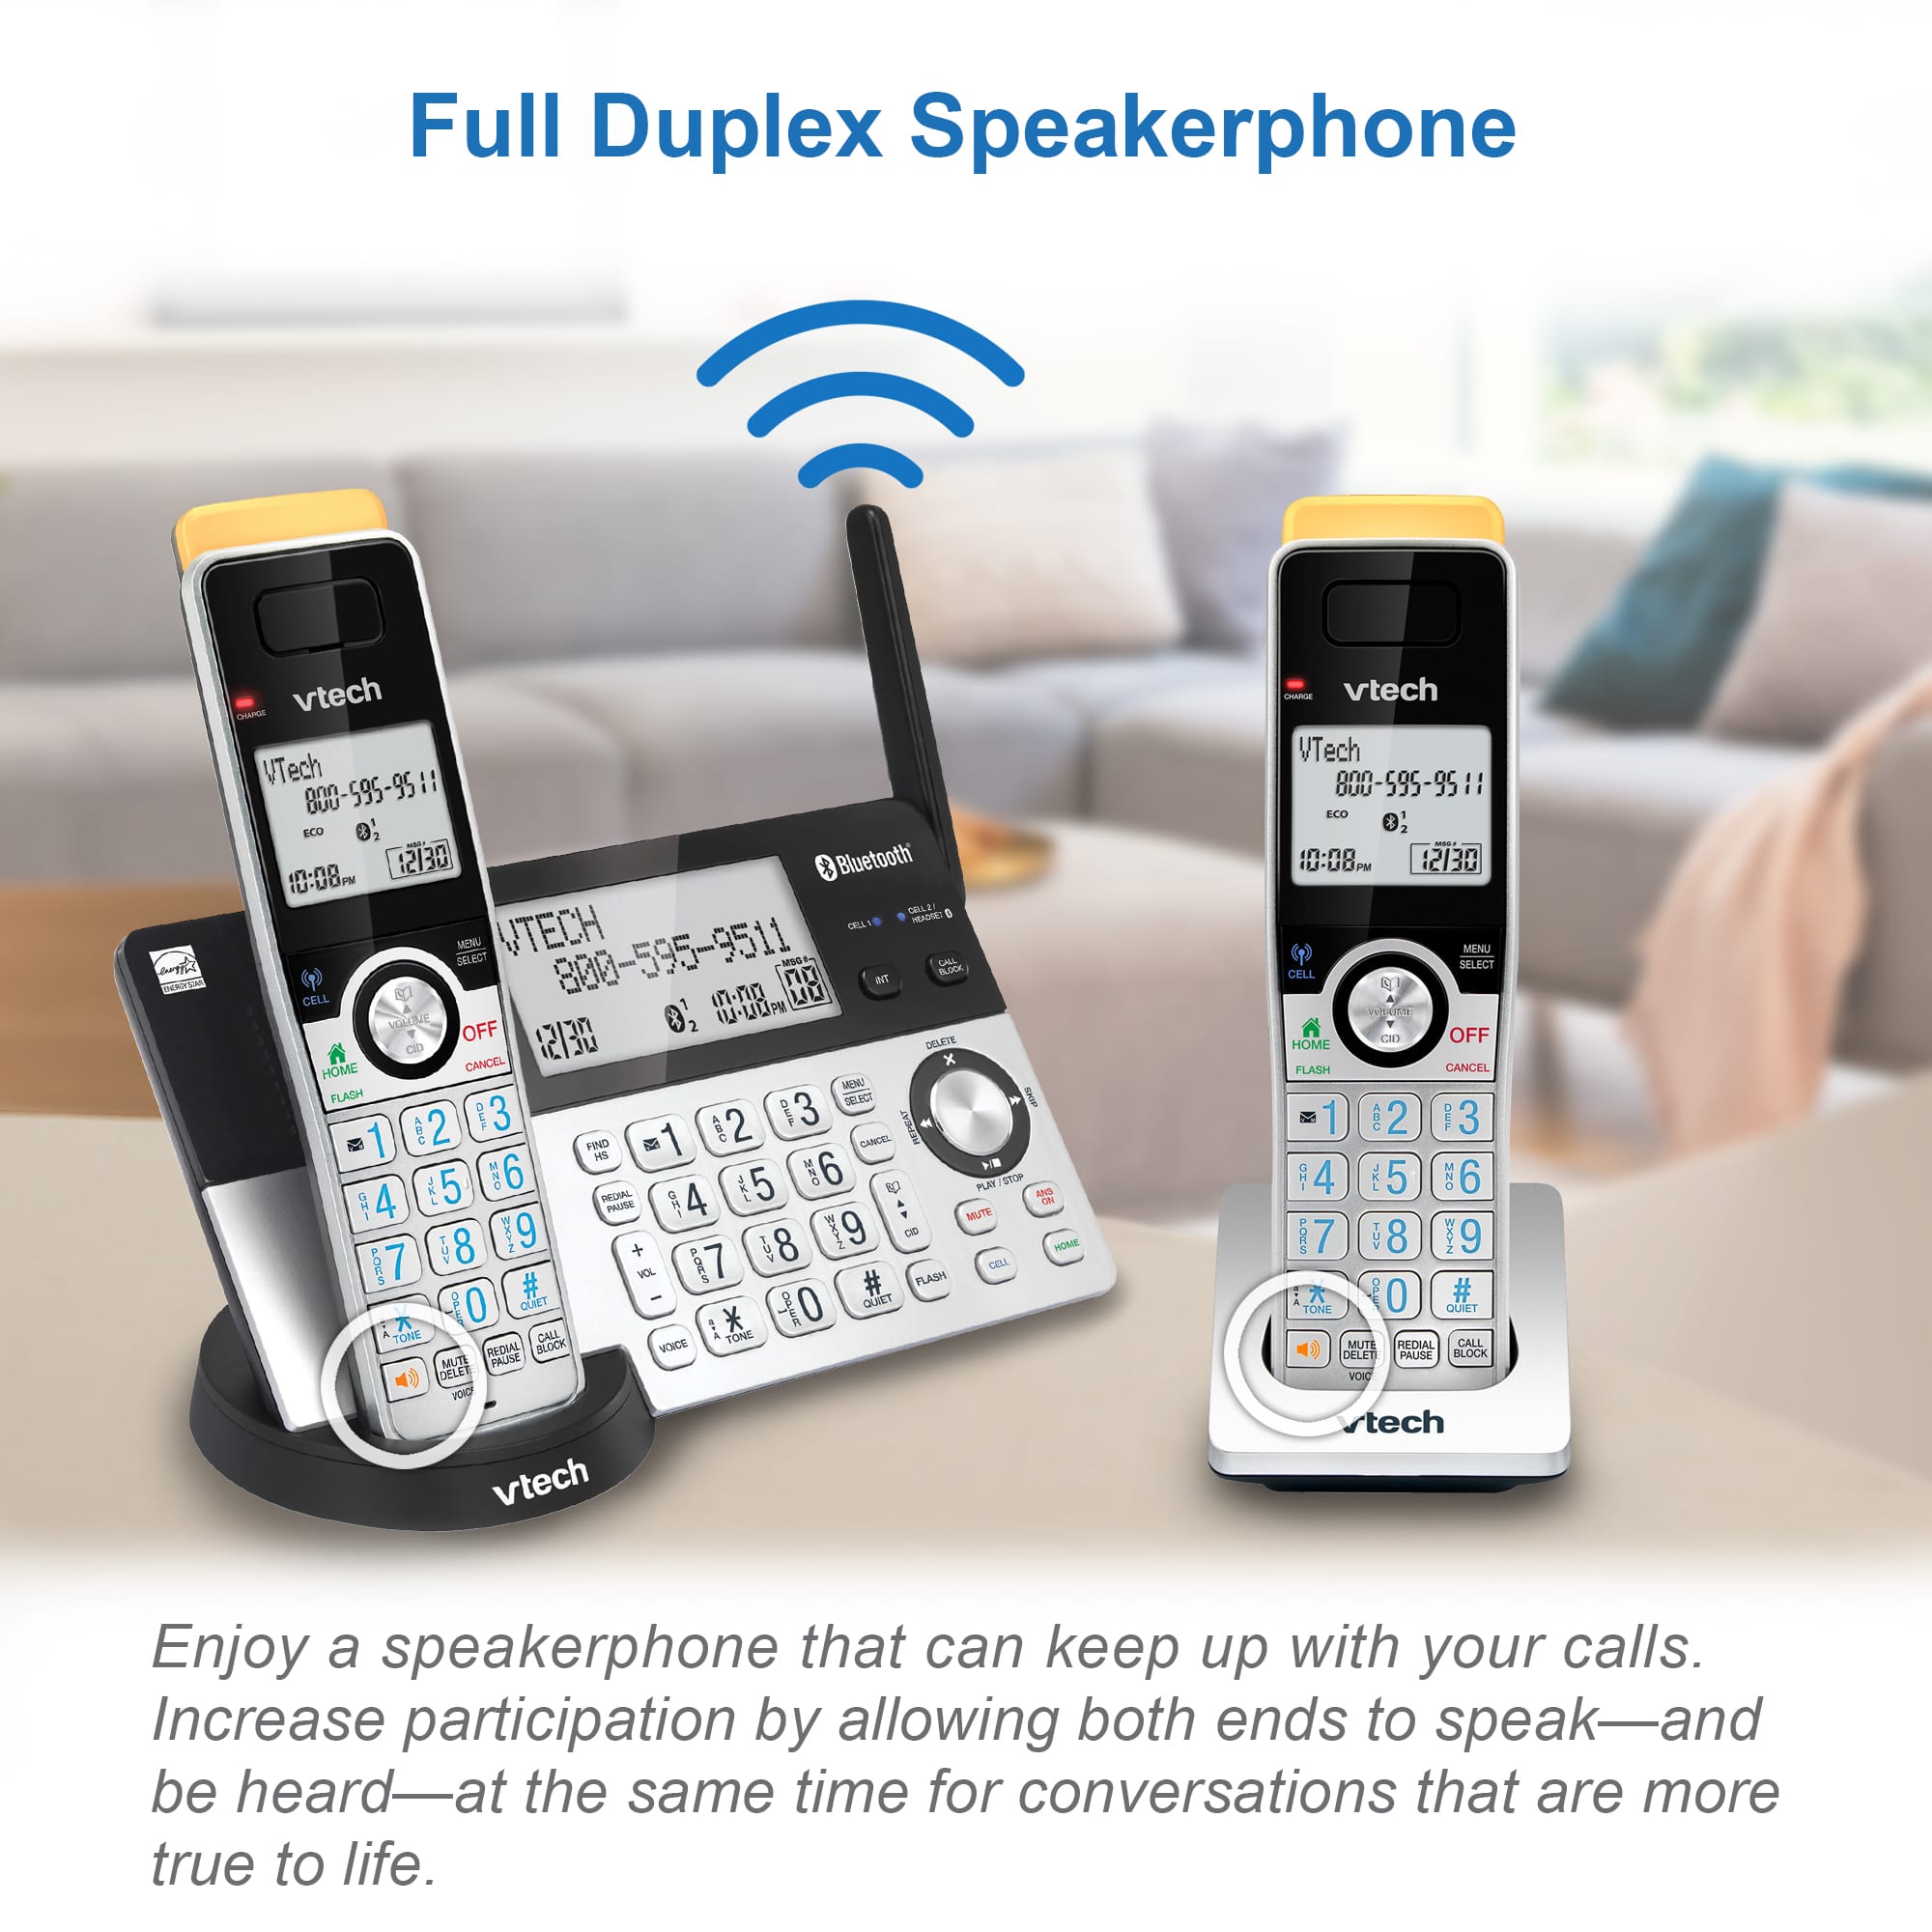 5-Handset Cordless Phone with Super Long Range, Bluetooth Connect to Cell, Smart Call Blocker and Answering System - view 3